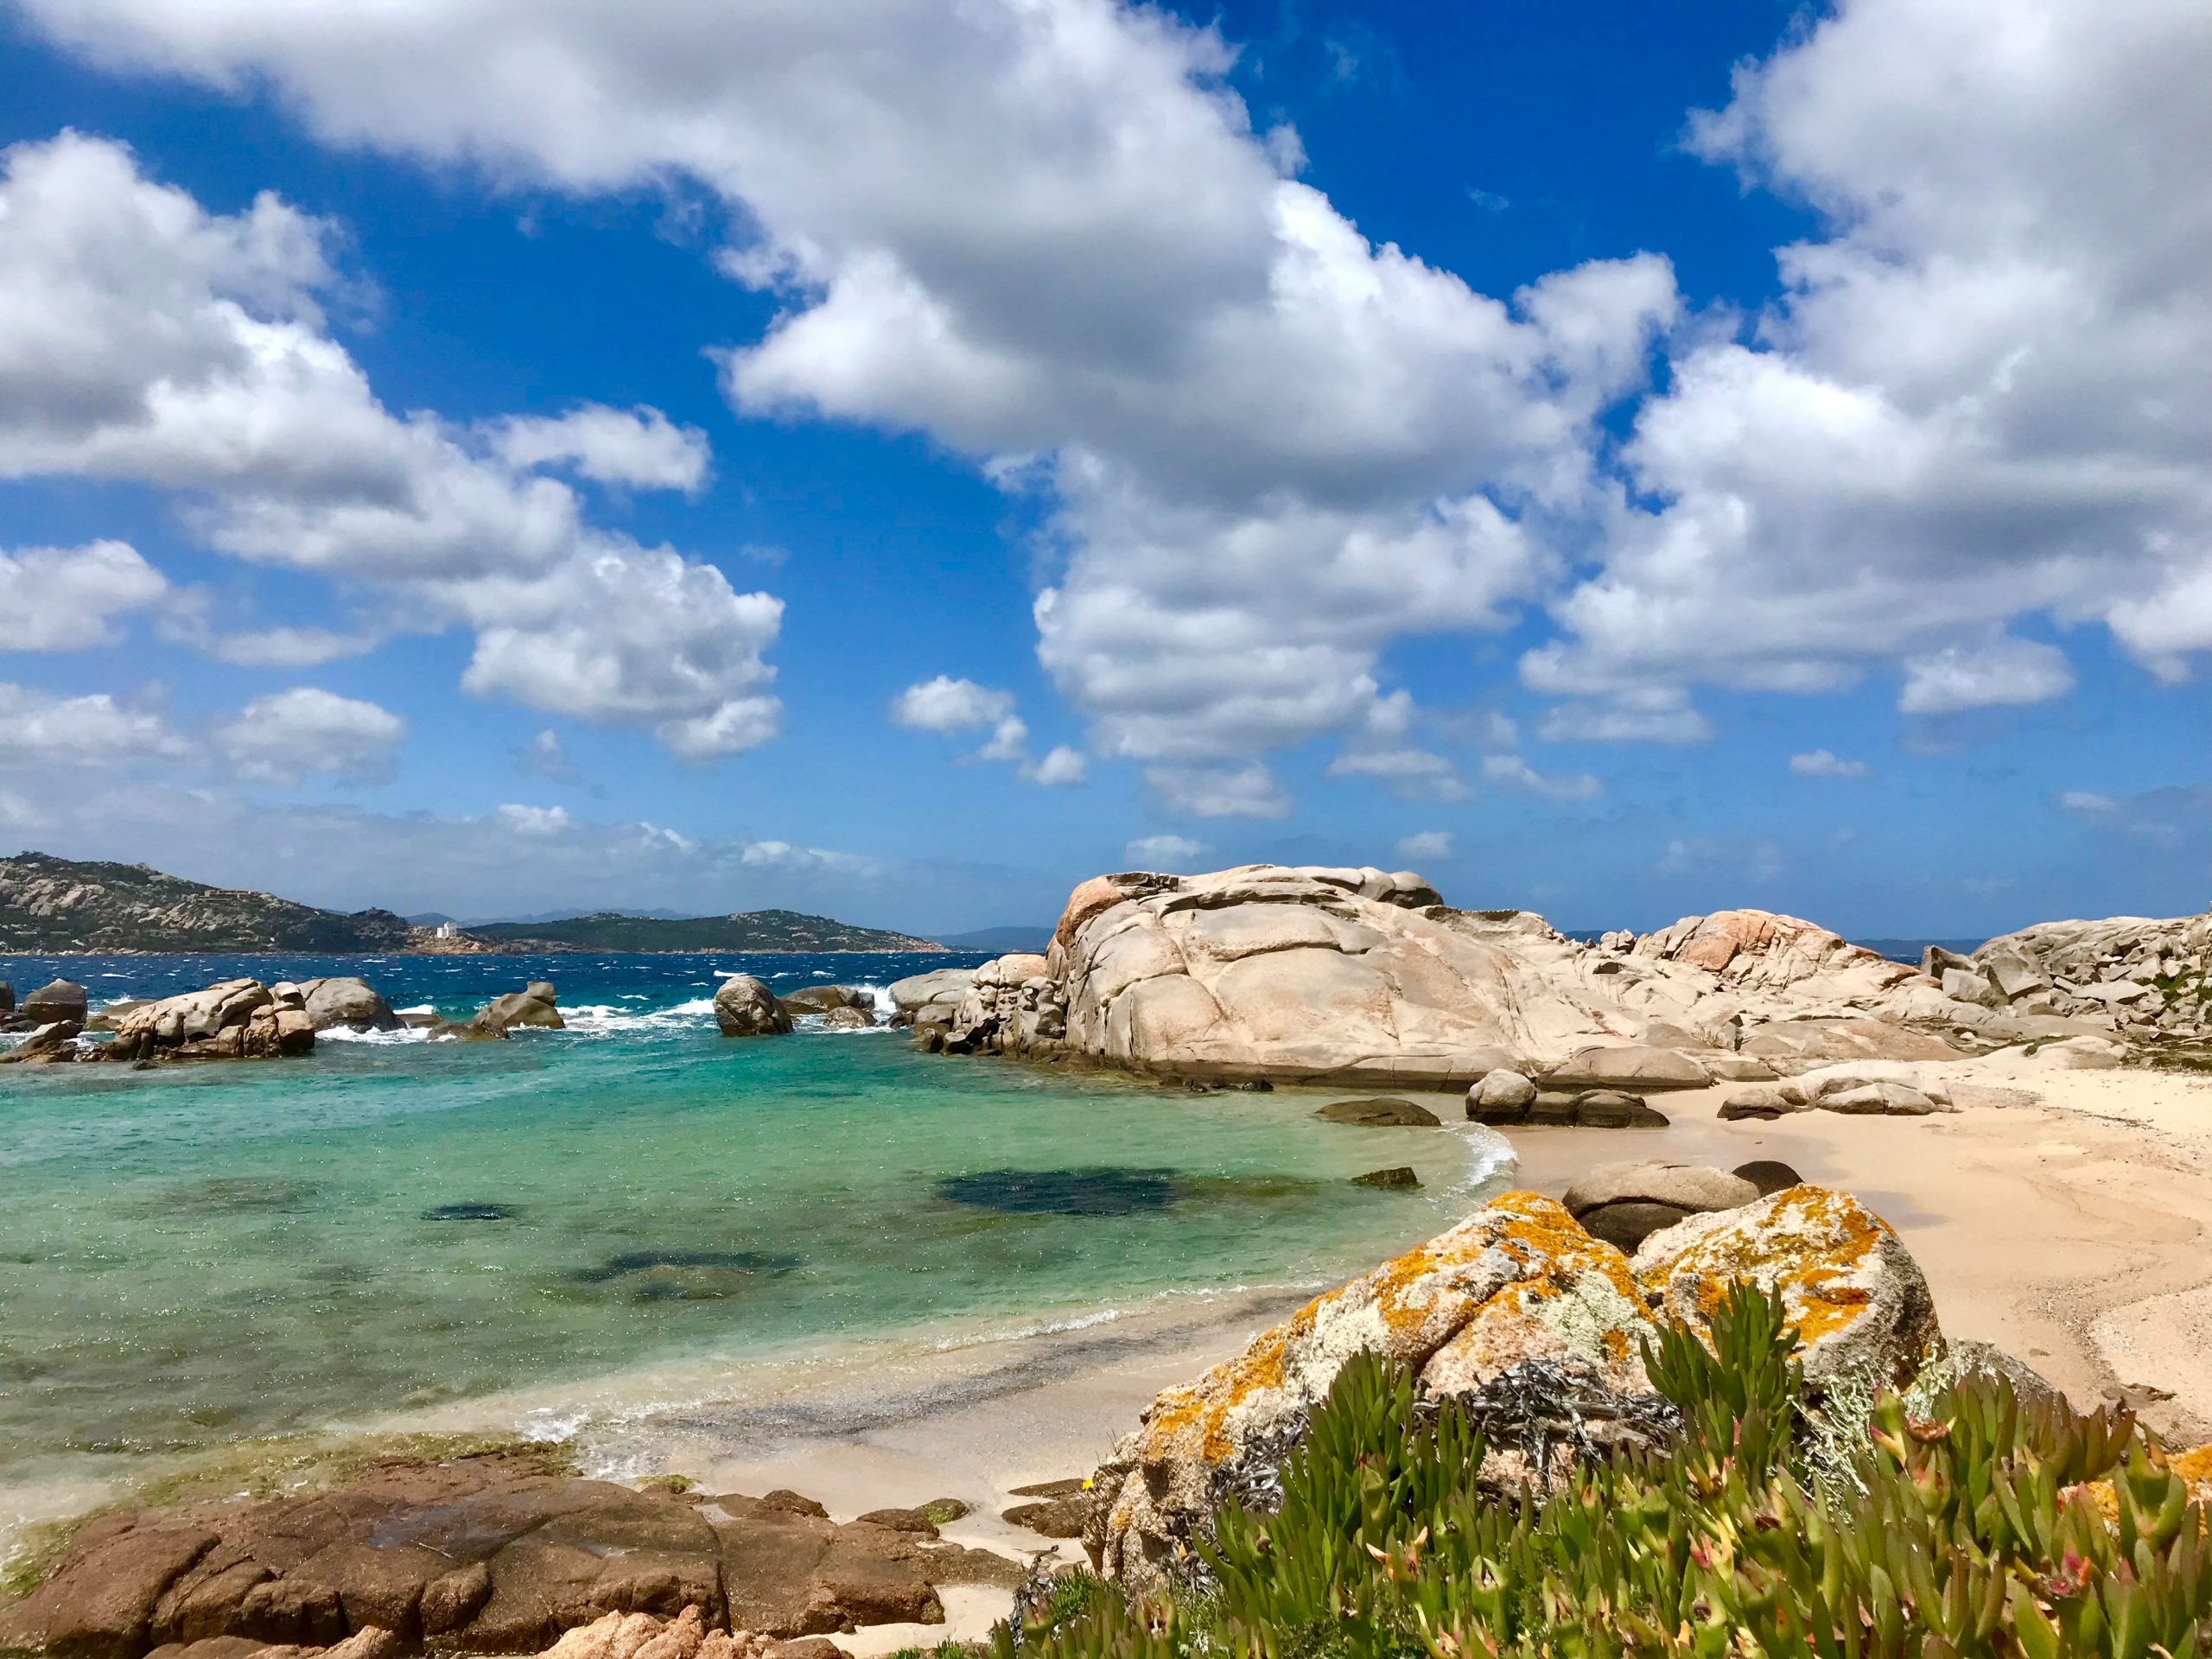 What are the must-see places in Sardinia?